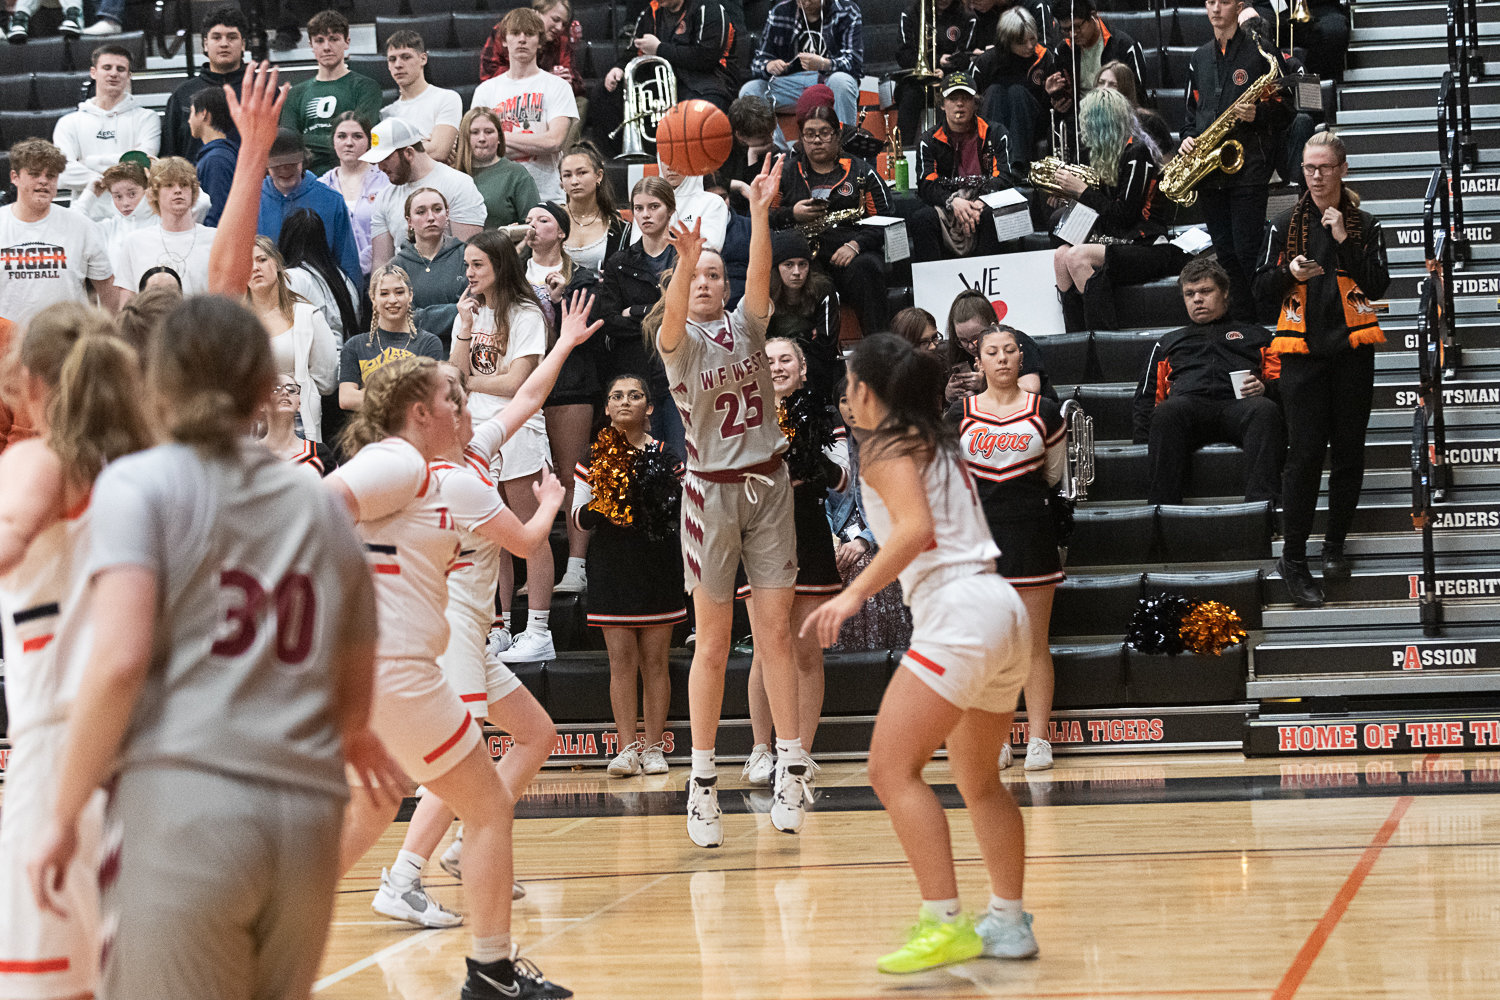 Grace Simpson launches a 3-pointer during W.F. West's 71-23 win at Centralia on Feb. 1.